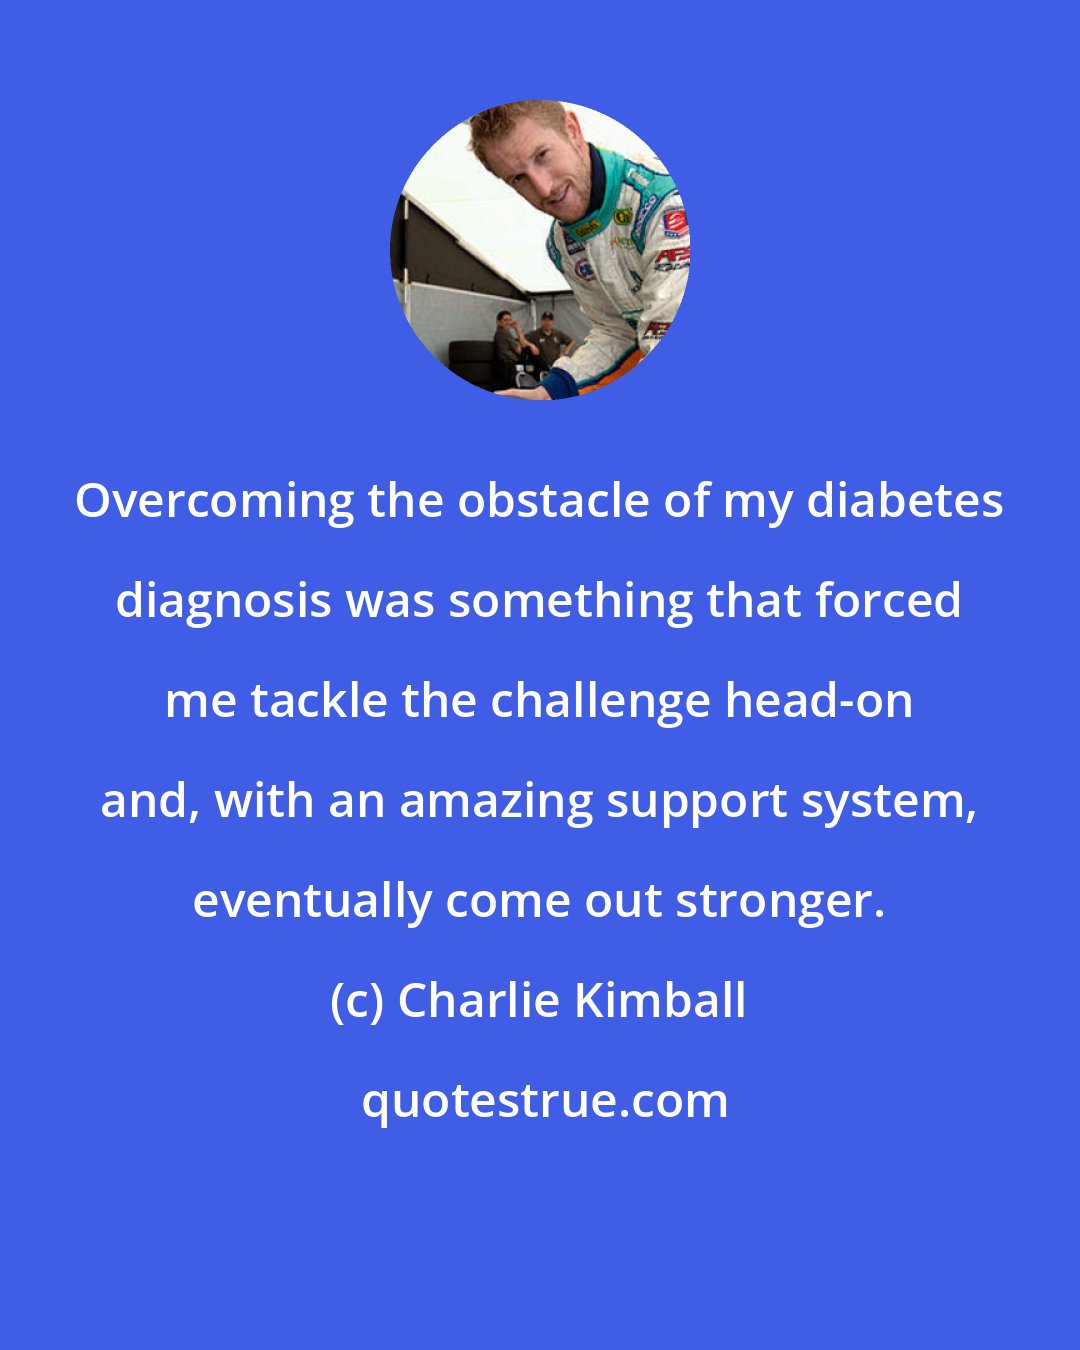 Charlie Kimball: Overcoming the obstacle of my diabetes diagnosis was something that forced me tackle the challenge head-on and, with an amazing support system, eventually come out stronger.